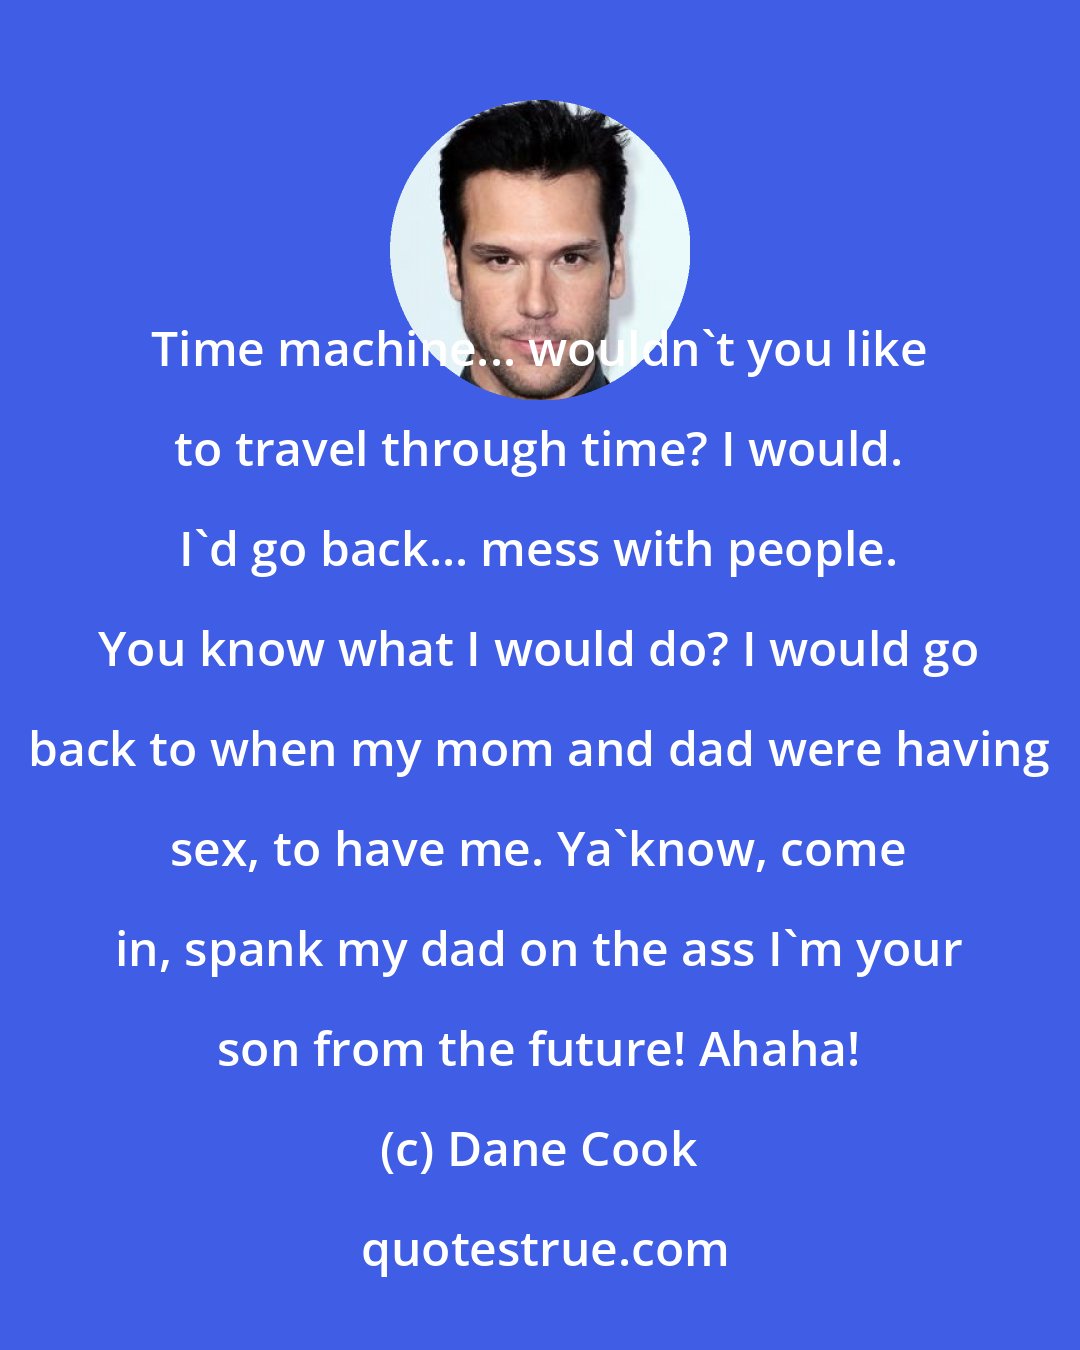 Dane Cook: Time machine... wouldn't you like to travel through time? I would. I'd go back... mess with people. You know what I would do? I would go back to when my mom and dad were having sex, to have me. Ya'know, come in, spank my dad on the ass I'm your son from the future! Ahaha!